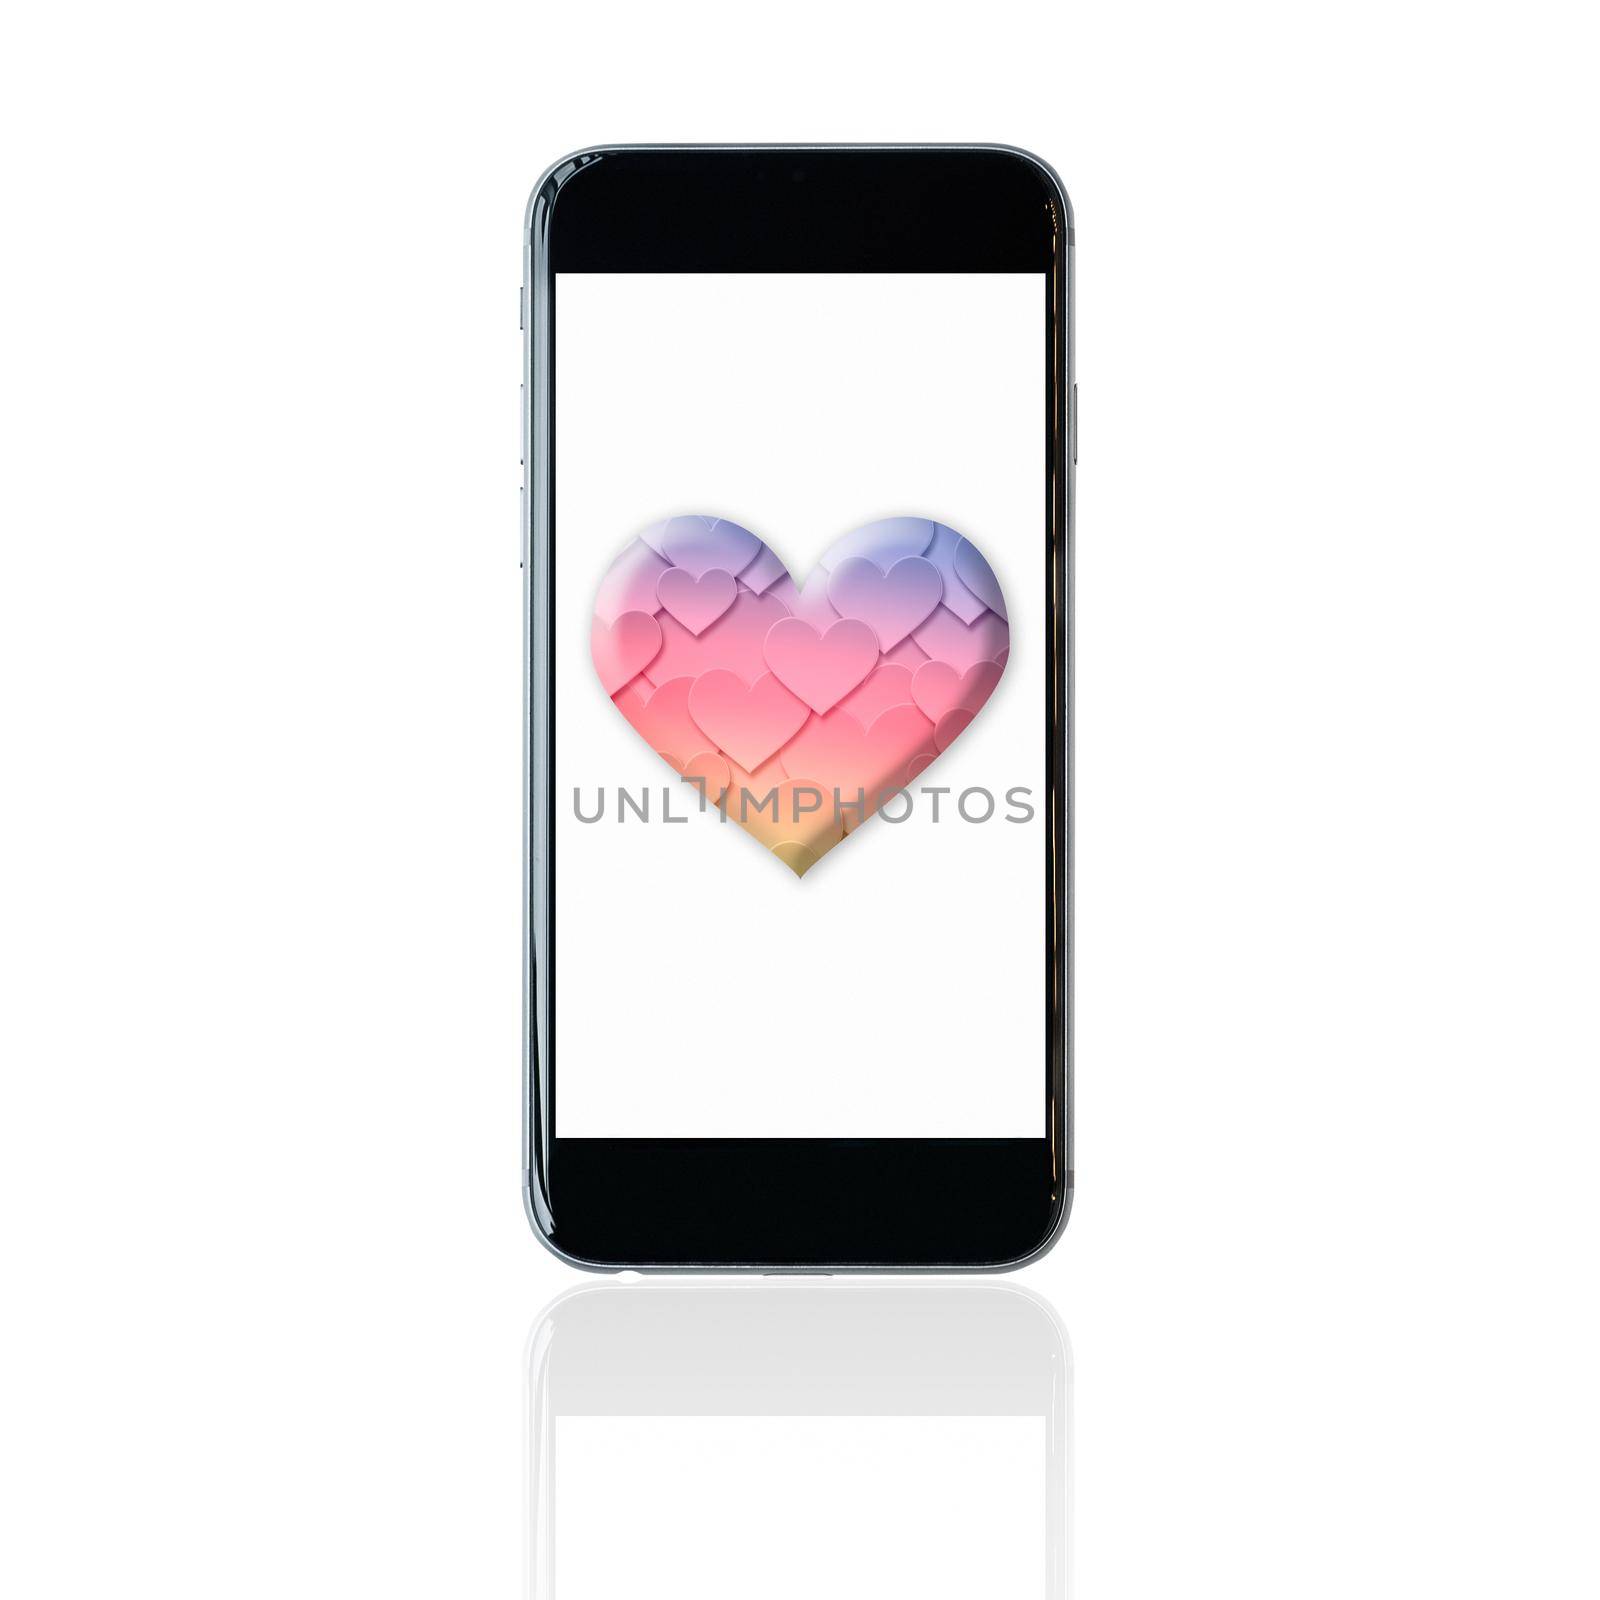 Smartphone with colourful heart symbol on screen. by Nuamfolio